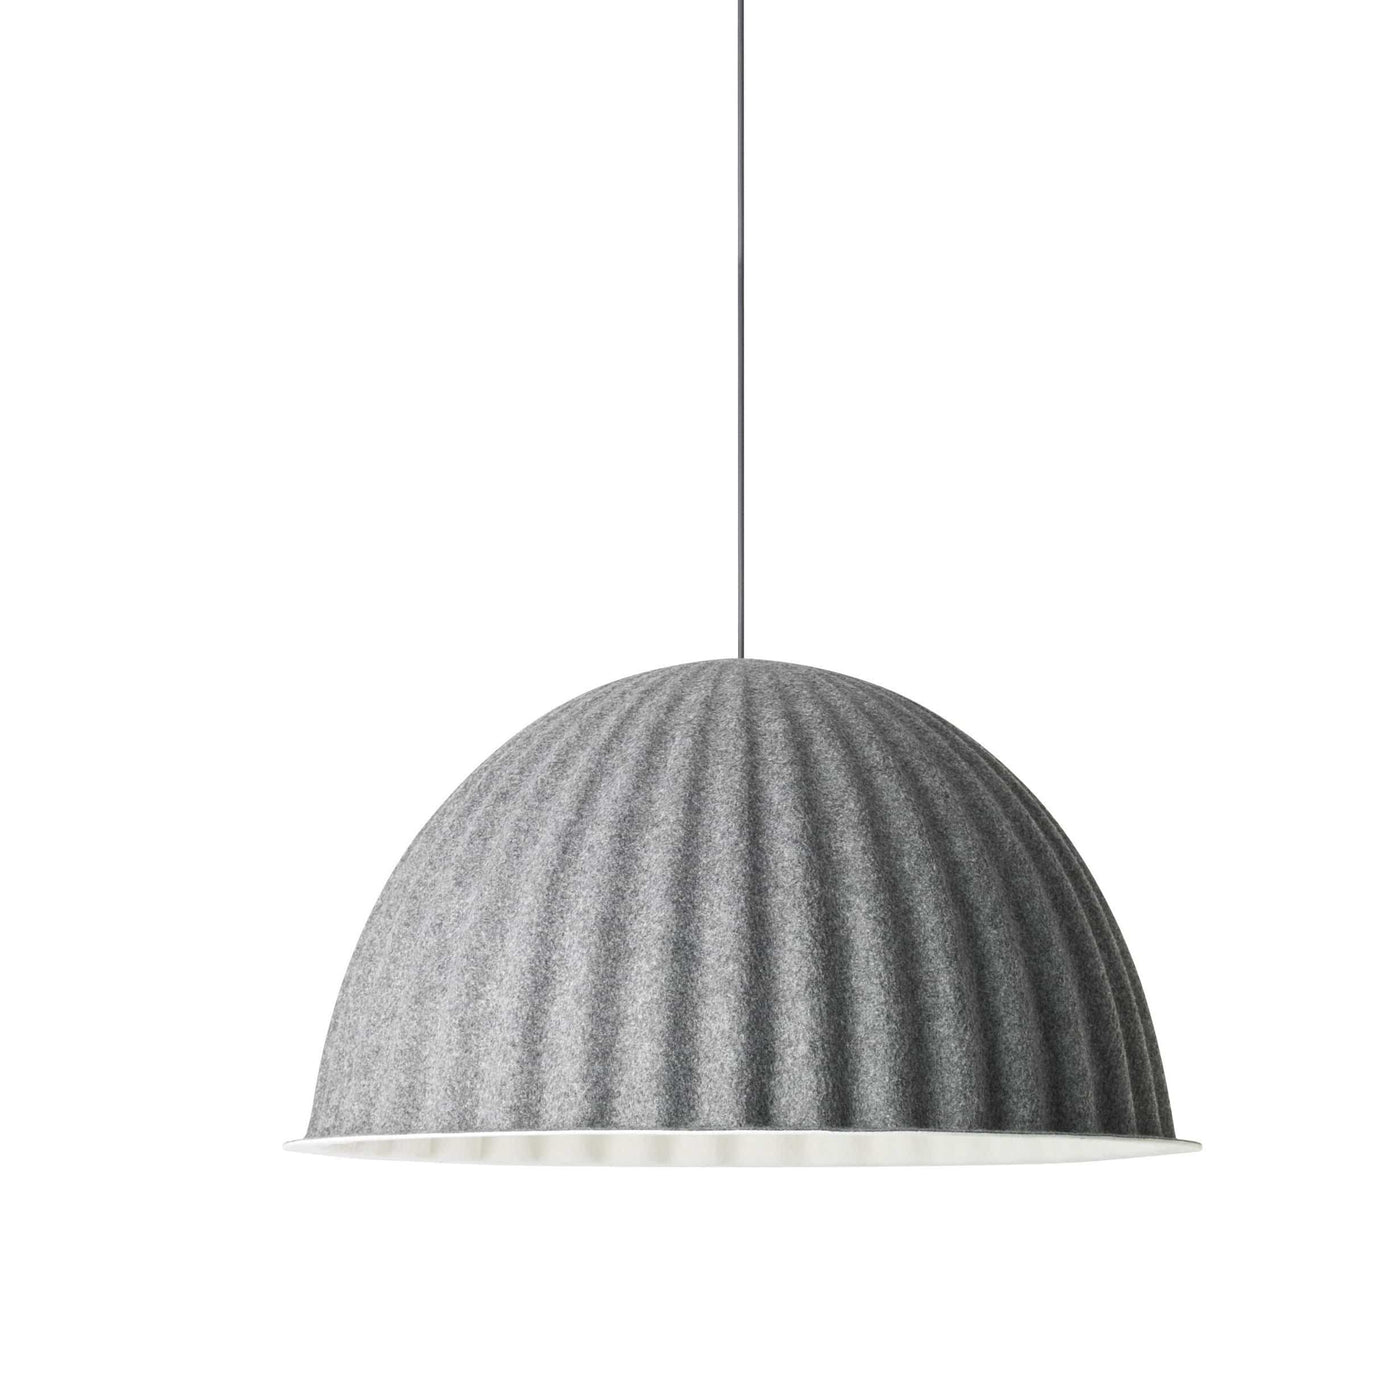 muuto under the bell pendant lamp grey large available at someday designs. #colour_grey-felt